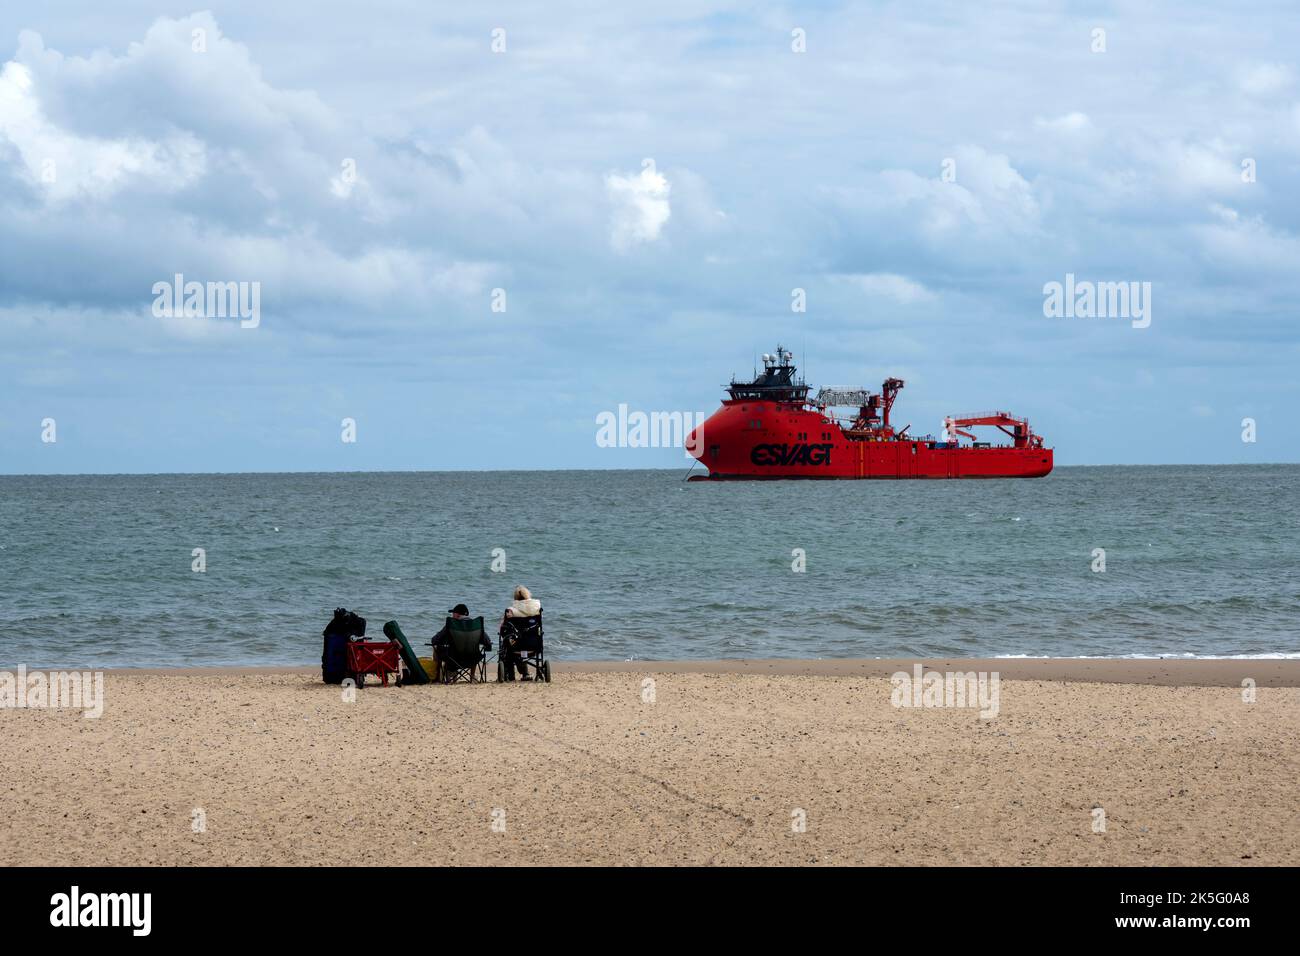 Esvagt Njord specialised offshore energy support ship, Great Yarmouth, Norfolk UK. Stock Photo